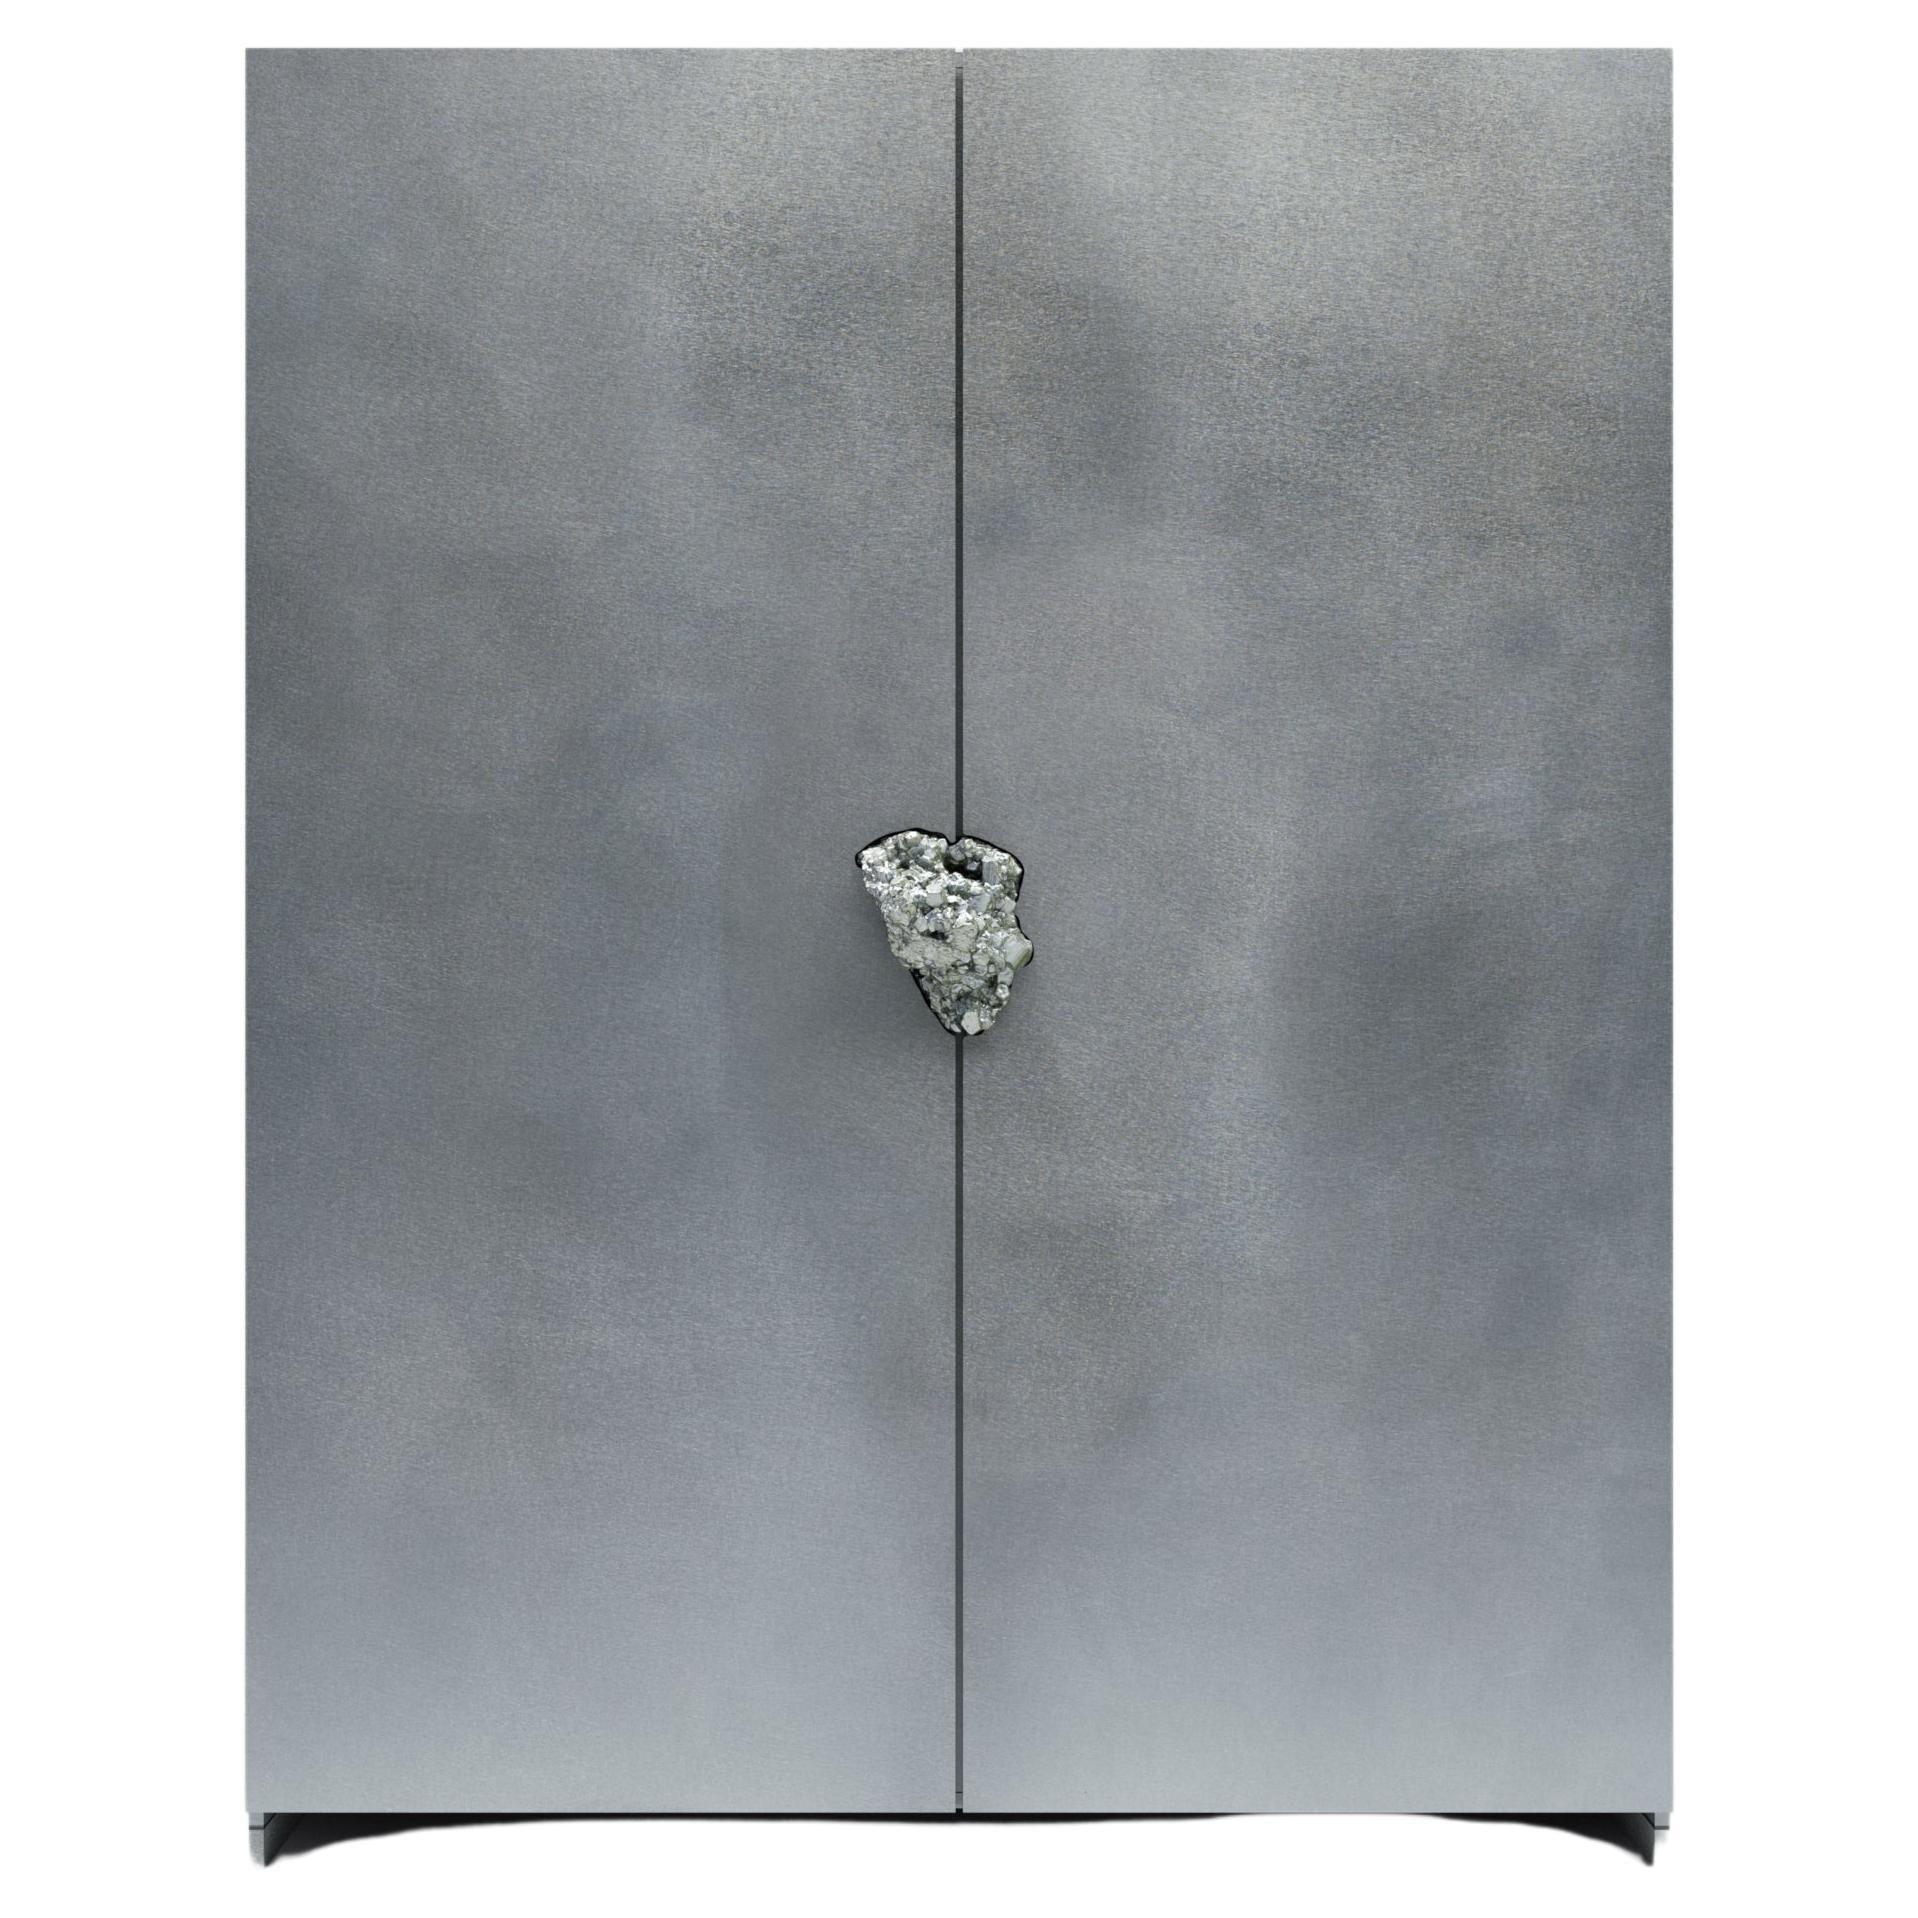 Oxidized and Waxed Aluminium Cabinet with Pyrite by Pierre De Valck